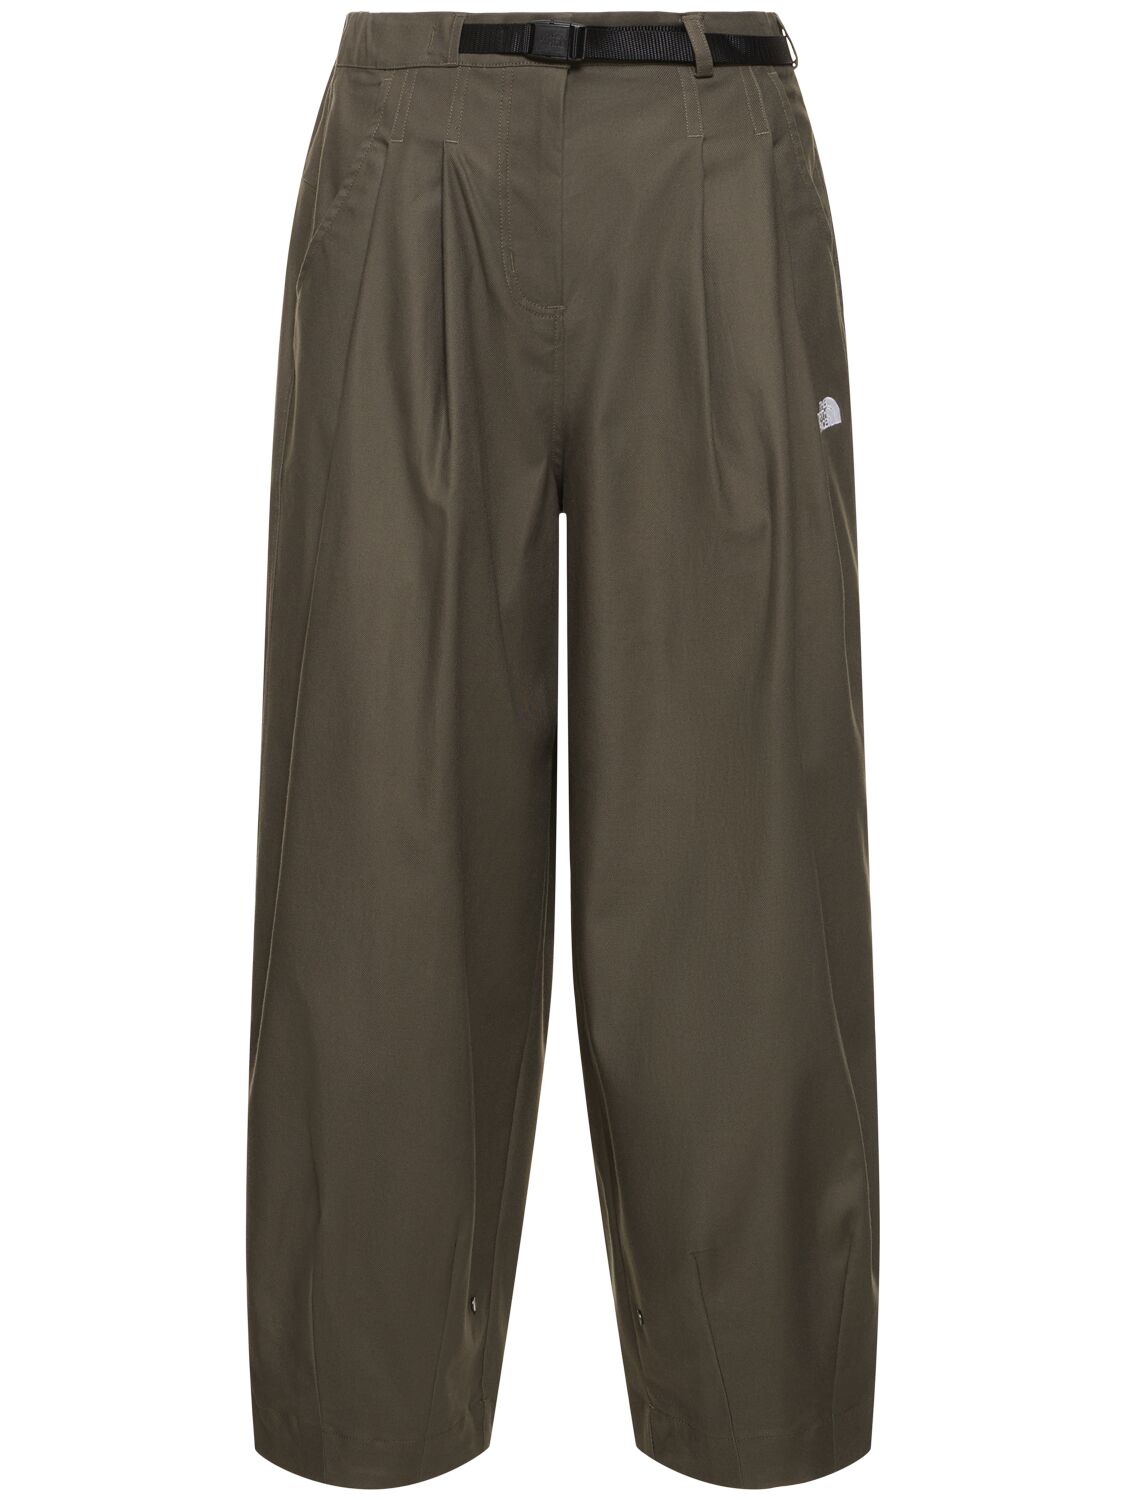 THE NORTH FACE PLEATED CASUAL PANTS